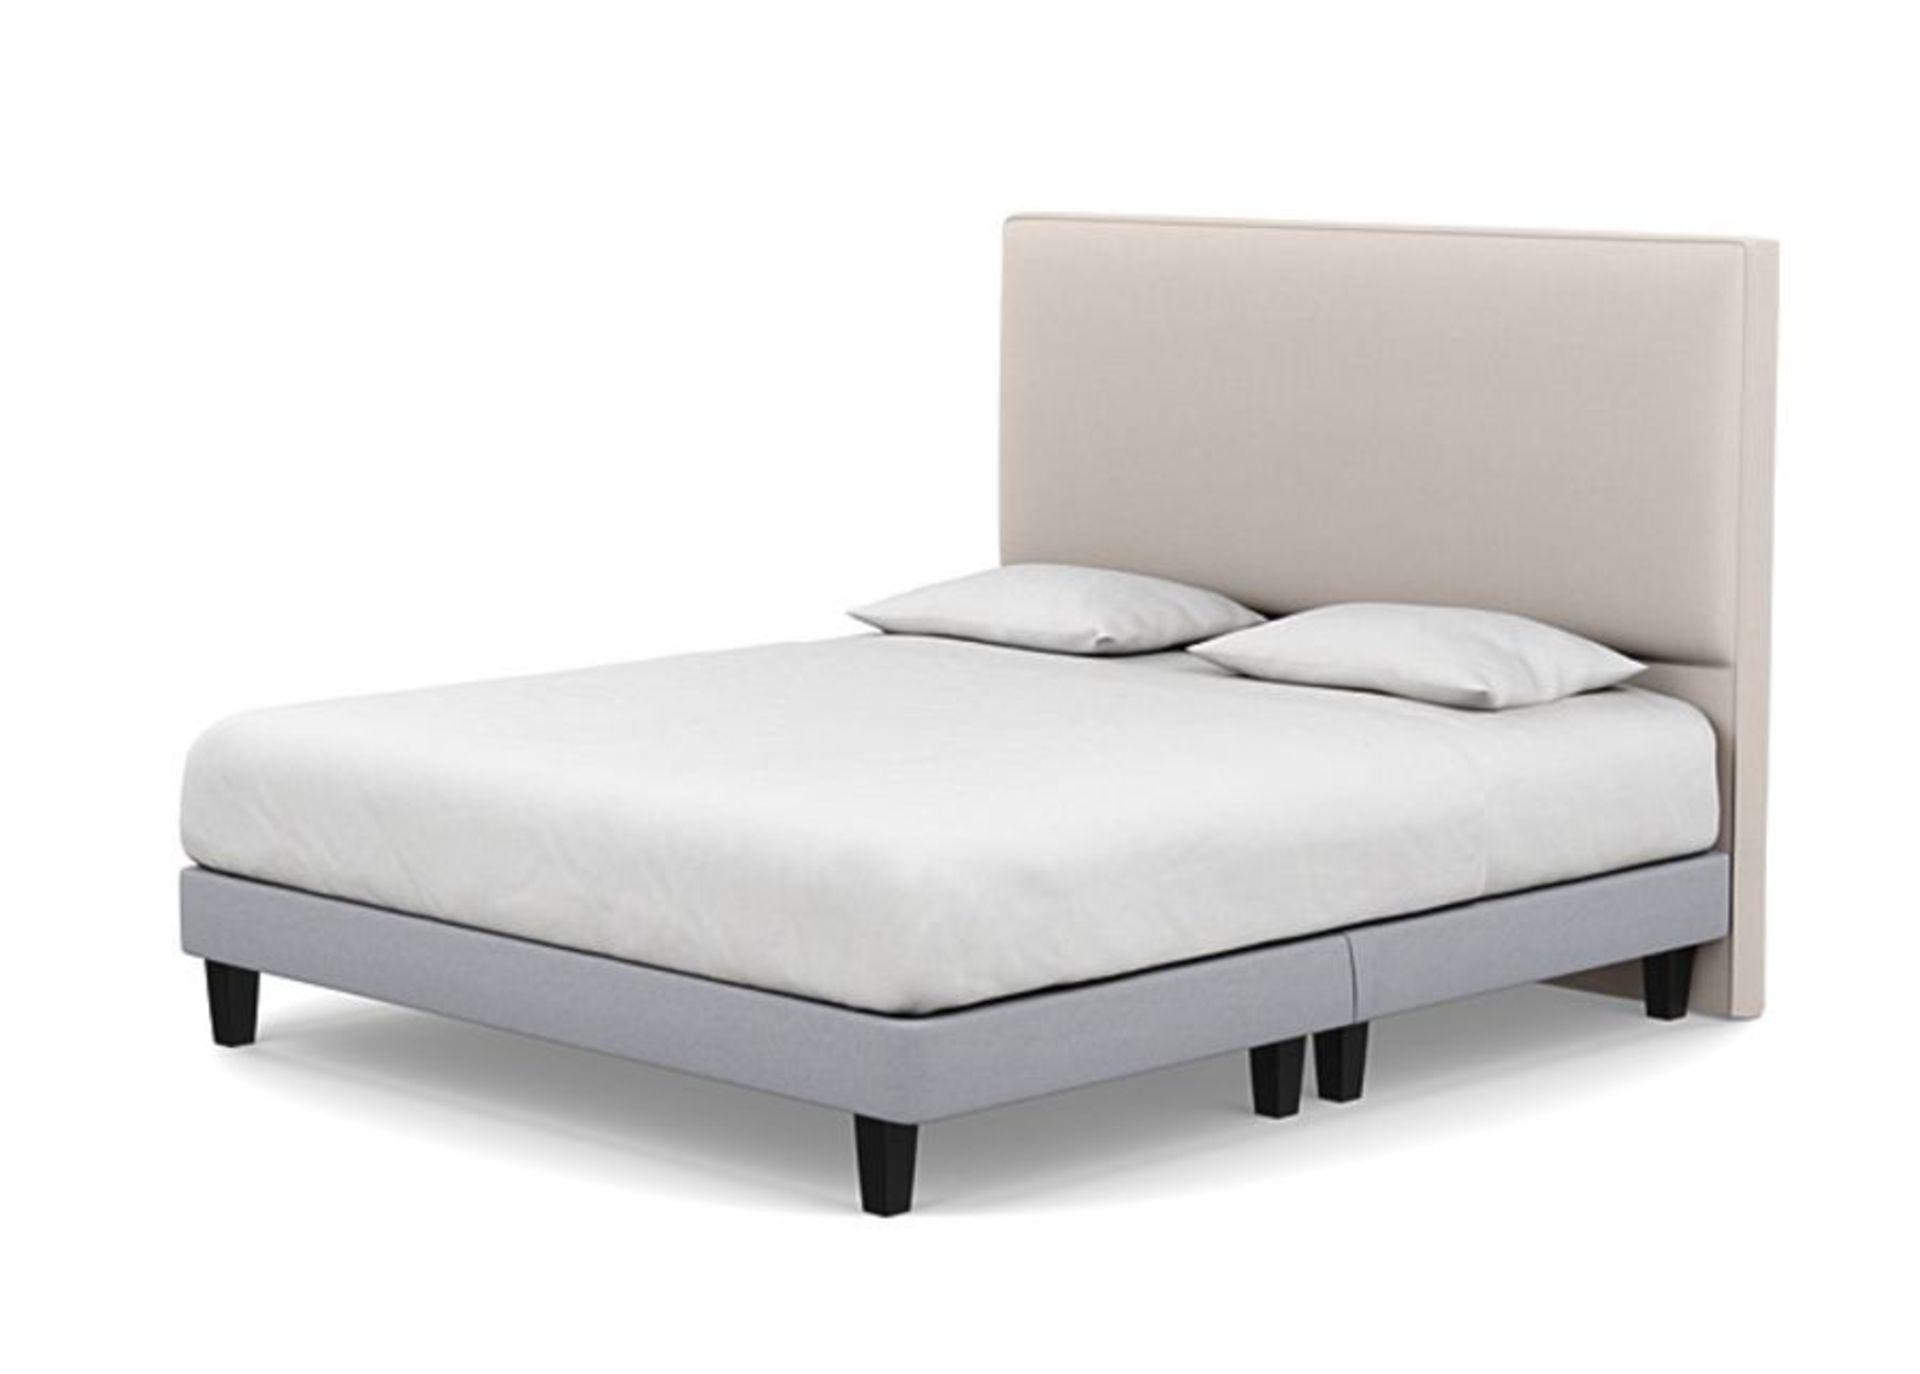 Heals Heal's Shallow Divan Super King Pewter and Cream Cotton Dark Solid Wood RRP ?1059.00 Heal's - Image 6 of 7